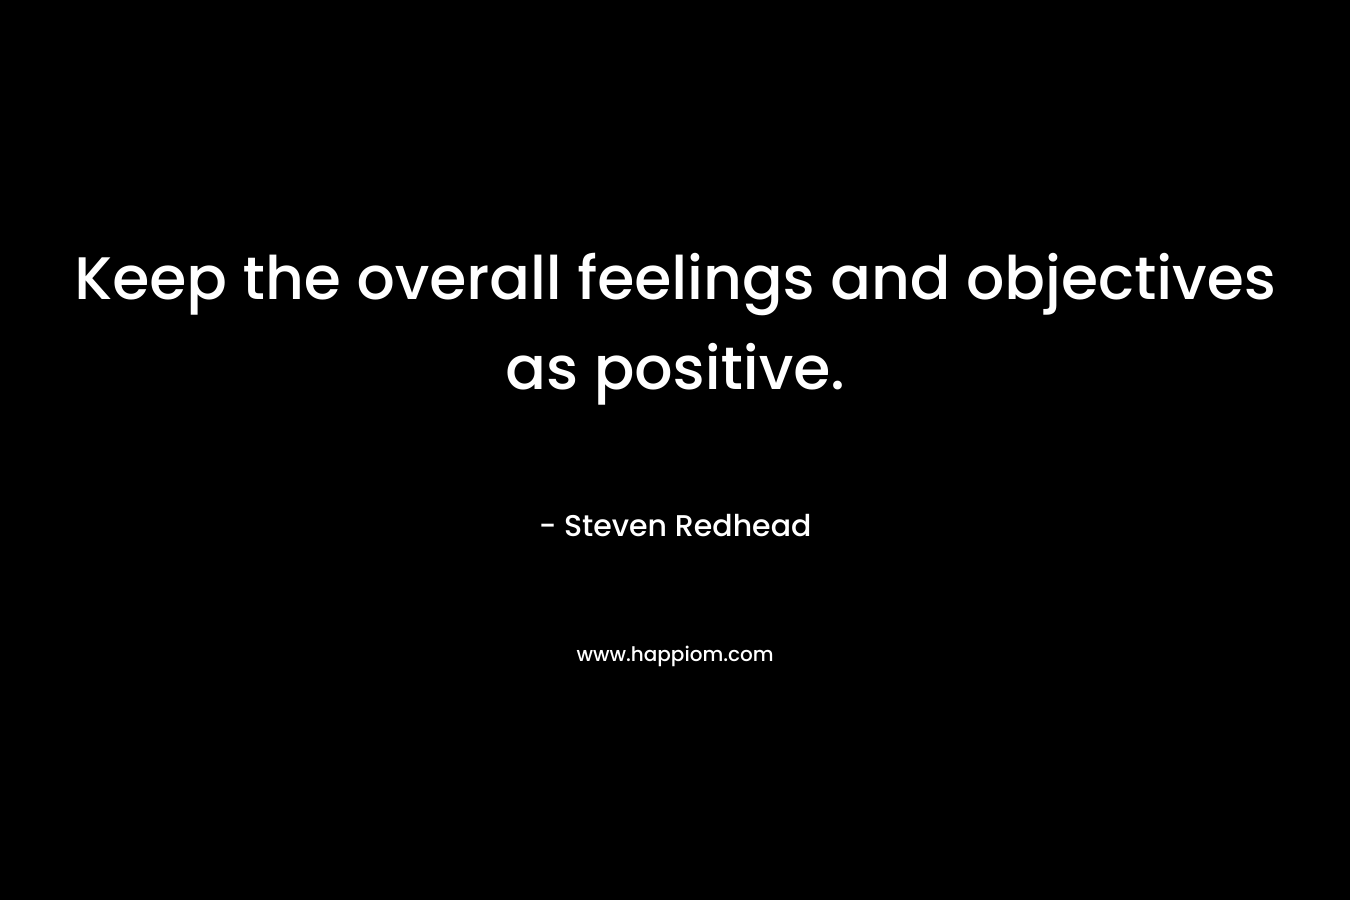 Keep the overall feelings and objectives as positive. – Steven Redhead